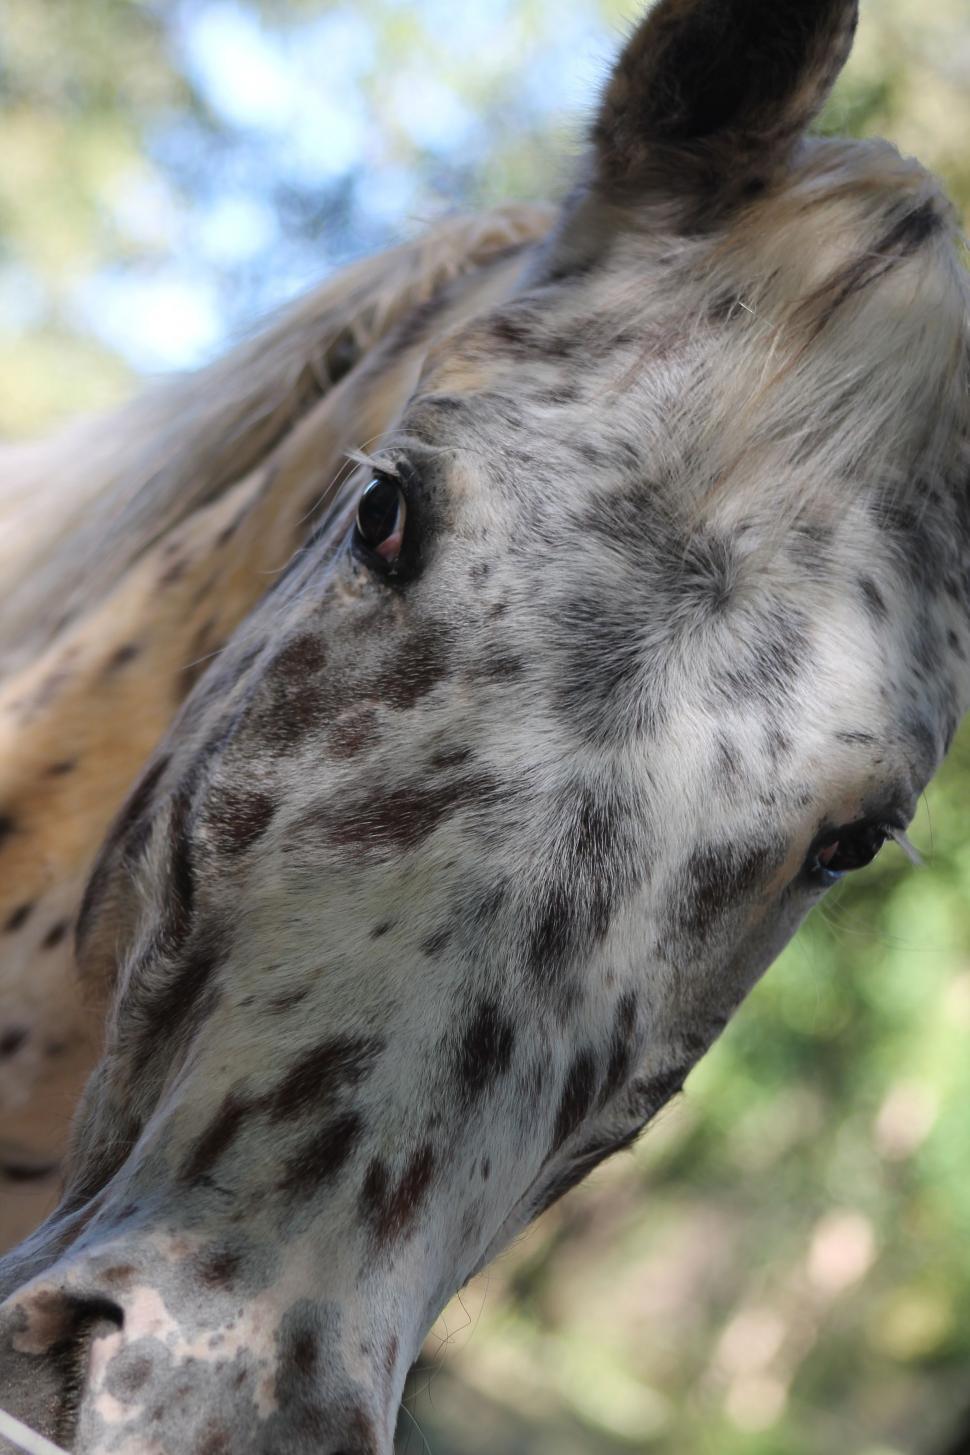 Free Image of Horse Head and Eyes  